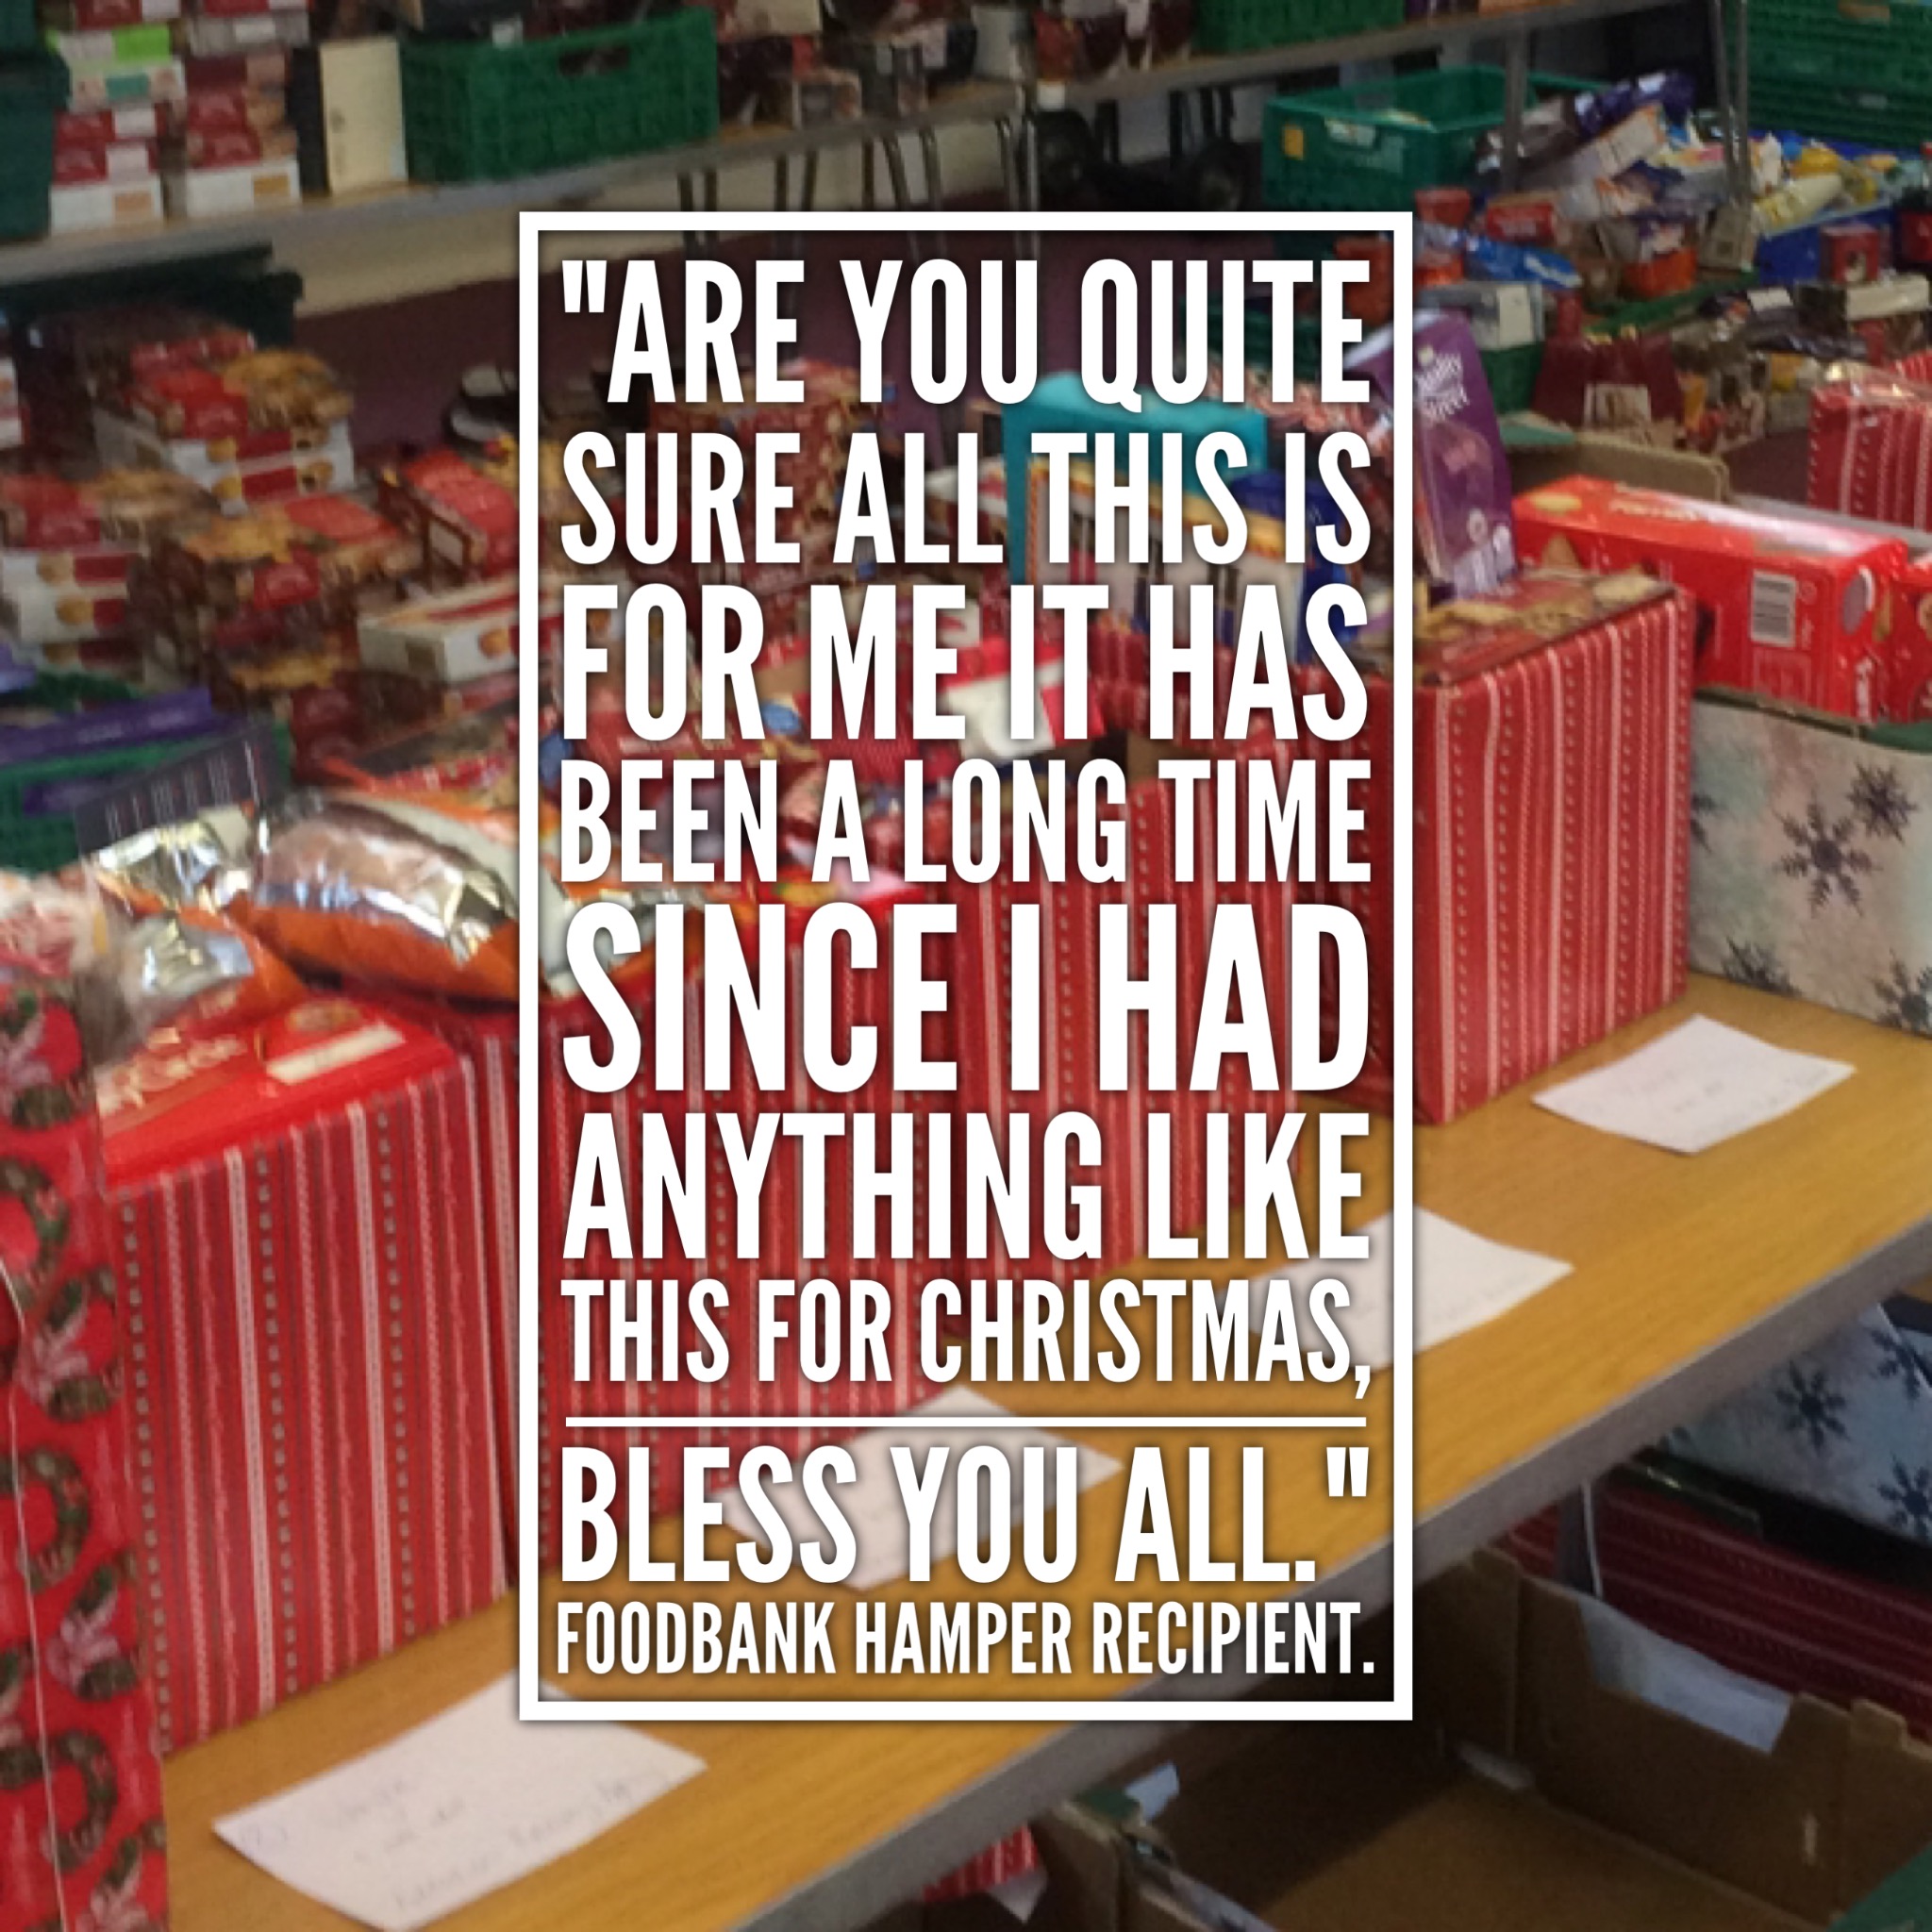 Celebrating the work of our Foodbanks